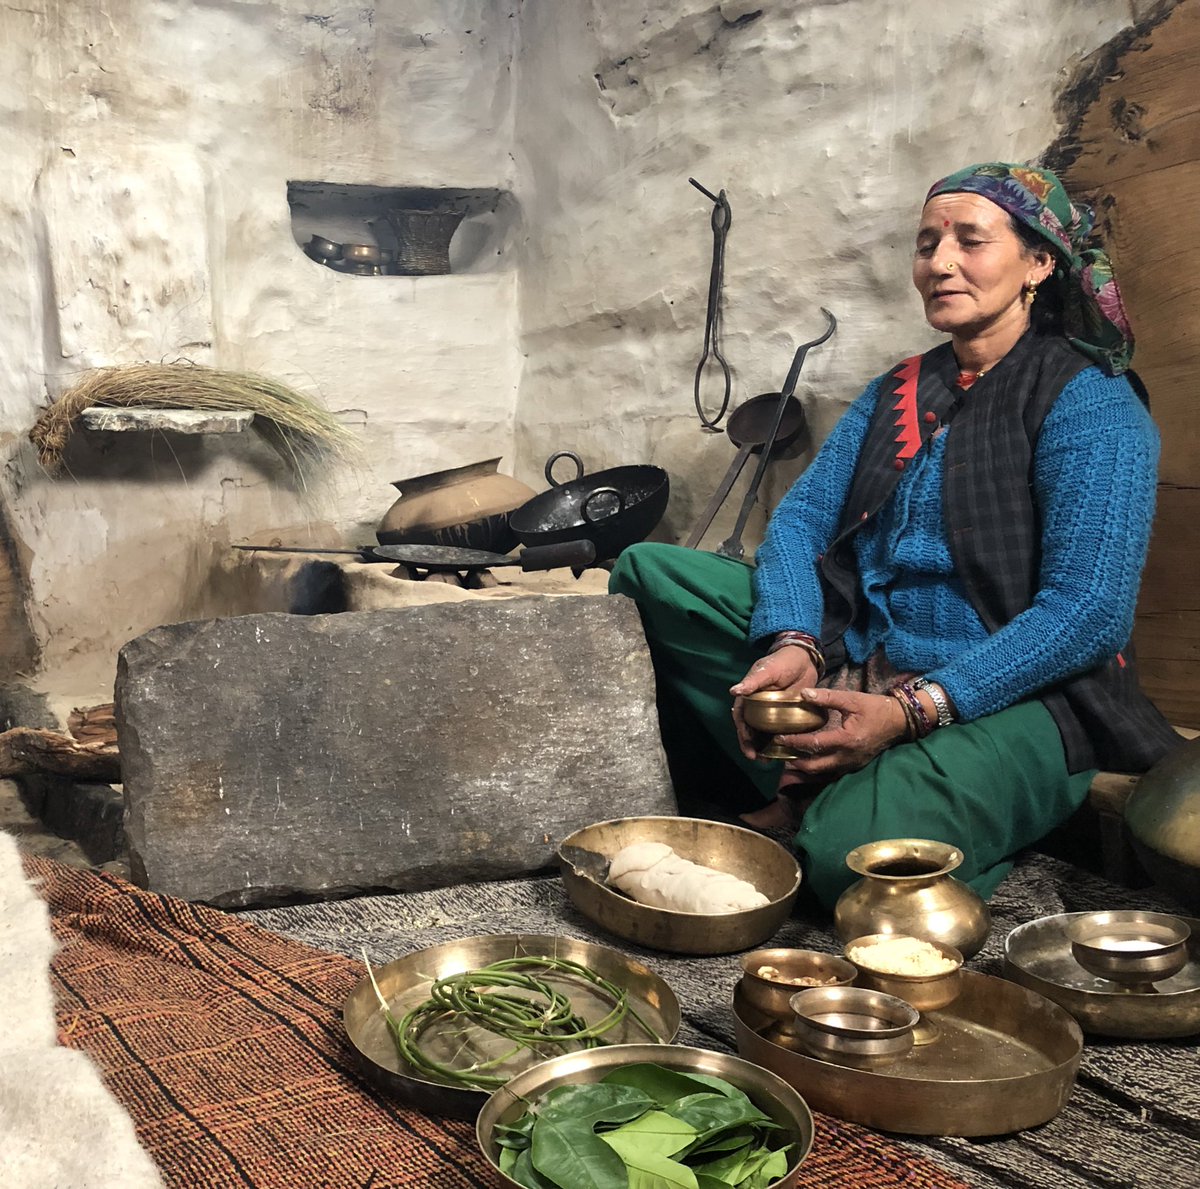 Because I shoot food-shows all over the country, I come across some incredible traditional kitchens and bartan. This is in a village in the mountains of Tons Valley in Garhwal. I love the kanse ke bartan. And just look at those two-ended tools in the last pic! Ingenious.